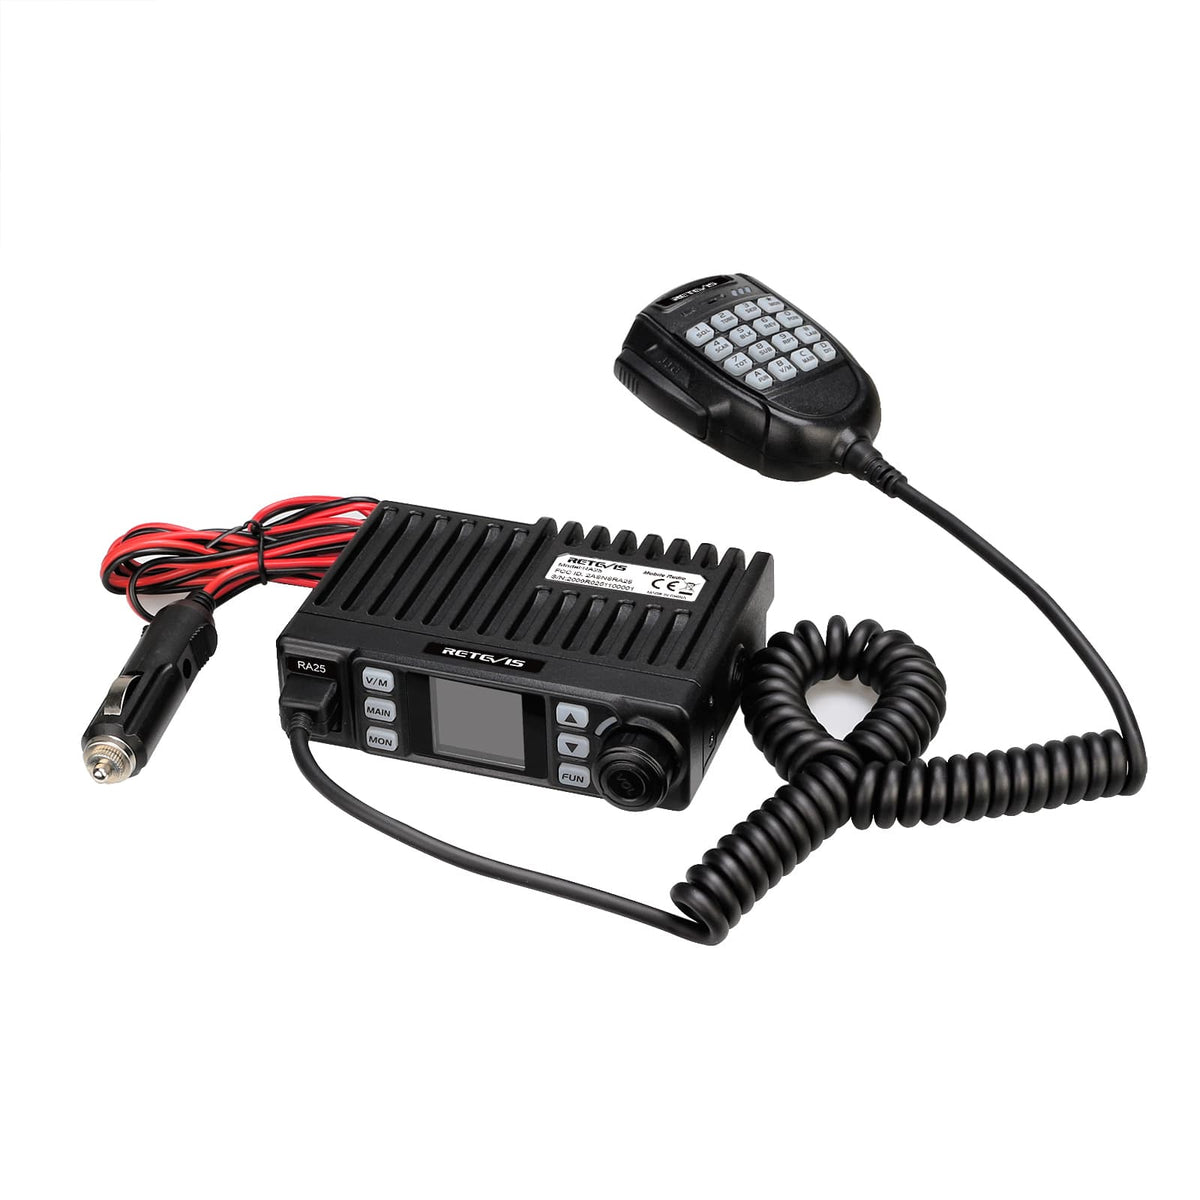 Retevis RA25 Mobile Repeater-Capable GMRS Radio 20W – myGMRS.com